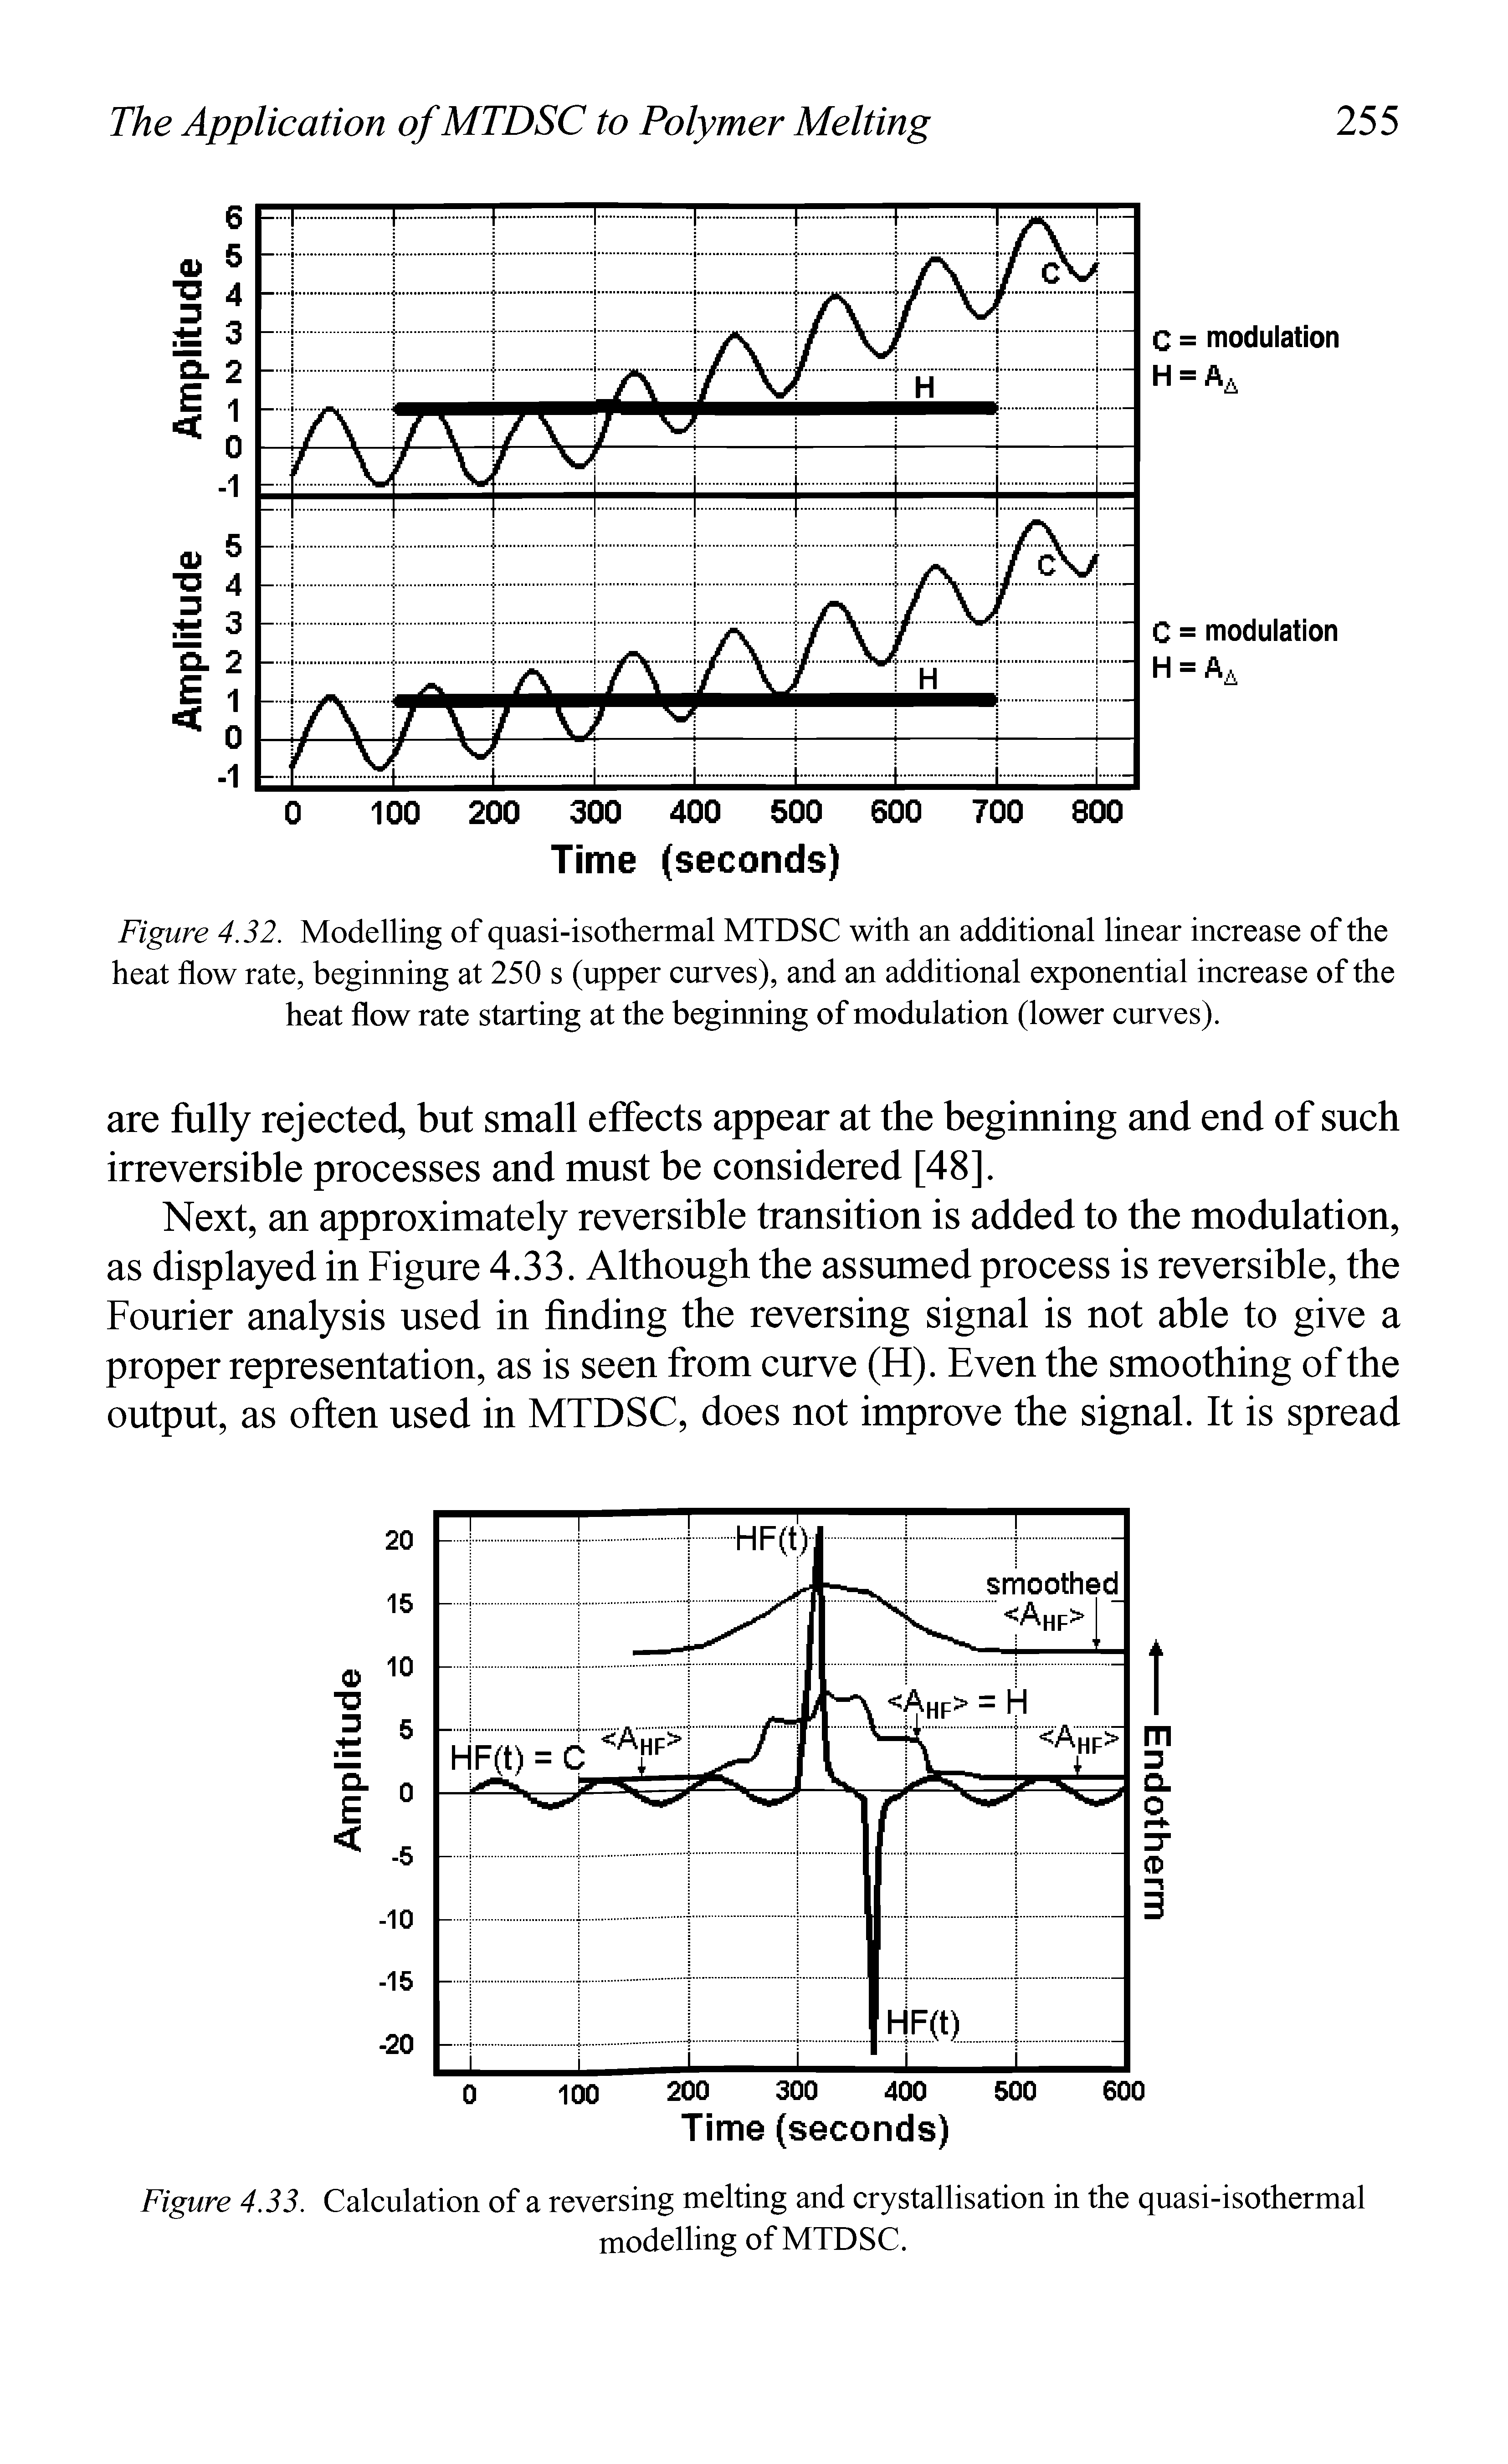 Figure 4.32. Modelling of quasi-isothermal MTDSC with an additional linear increase of the heat flow rate, beginning at 250 s (upper curves), and an additional exponential increase of the heat flow rate starting at the beginning of modulation (lower curves).